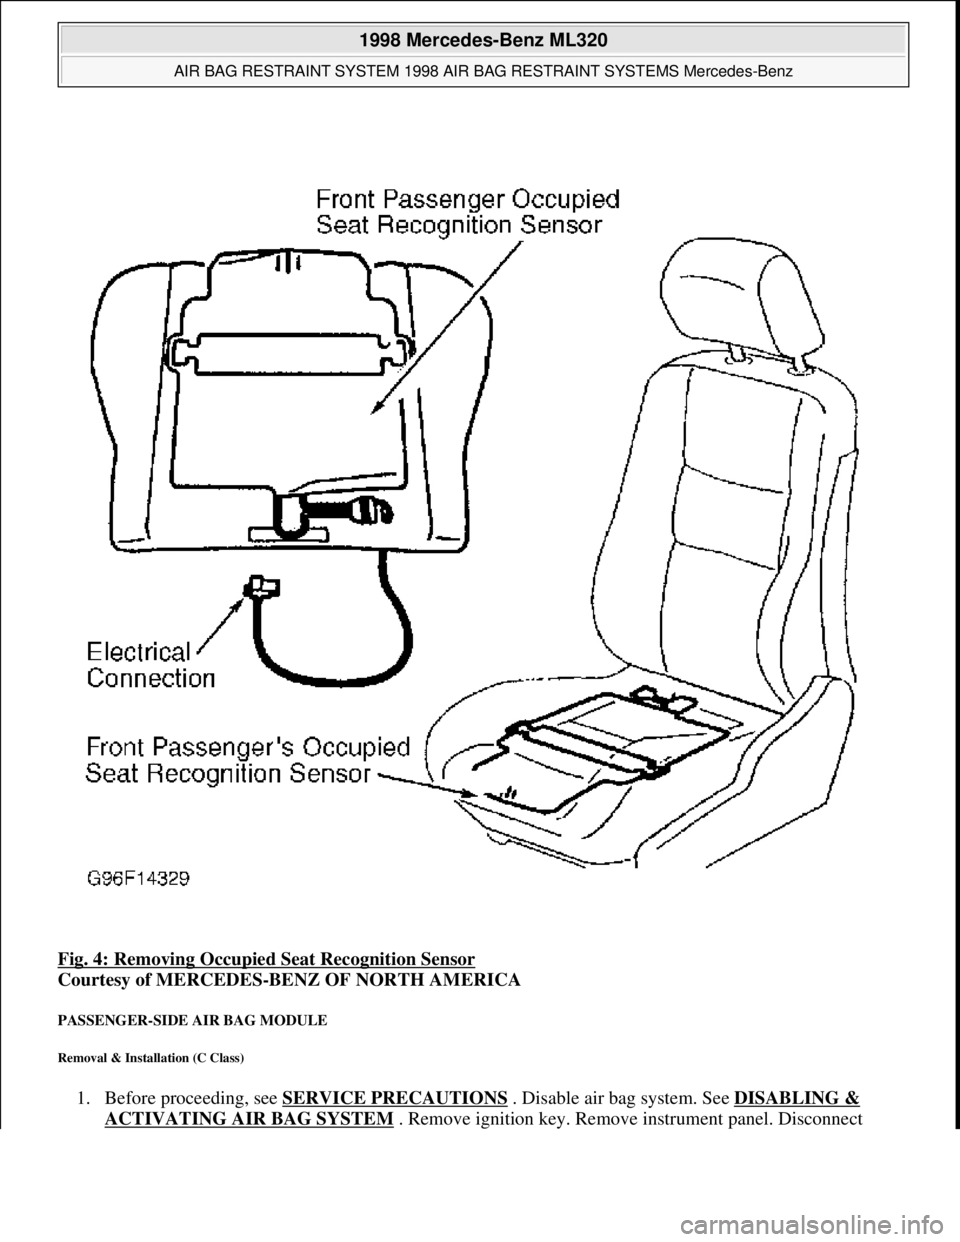 MERCEDES-BENZ ML500 1997  Complete Repair Manual Fig. 4: Removing Occupied Seat Recognition Sensor  
Courtesy of MERCEDES-BENZ OF NORTH AMERICA   
PASSENGER-SIDE AIR BAG MODULE 
Removal & Installation (C Class) 
1. Before proceeding, see SERVICE PRE